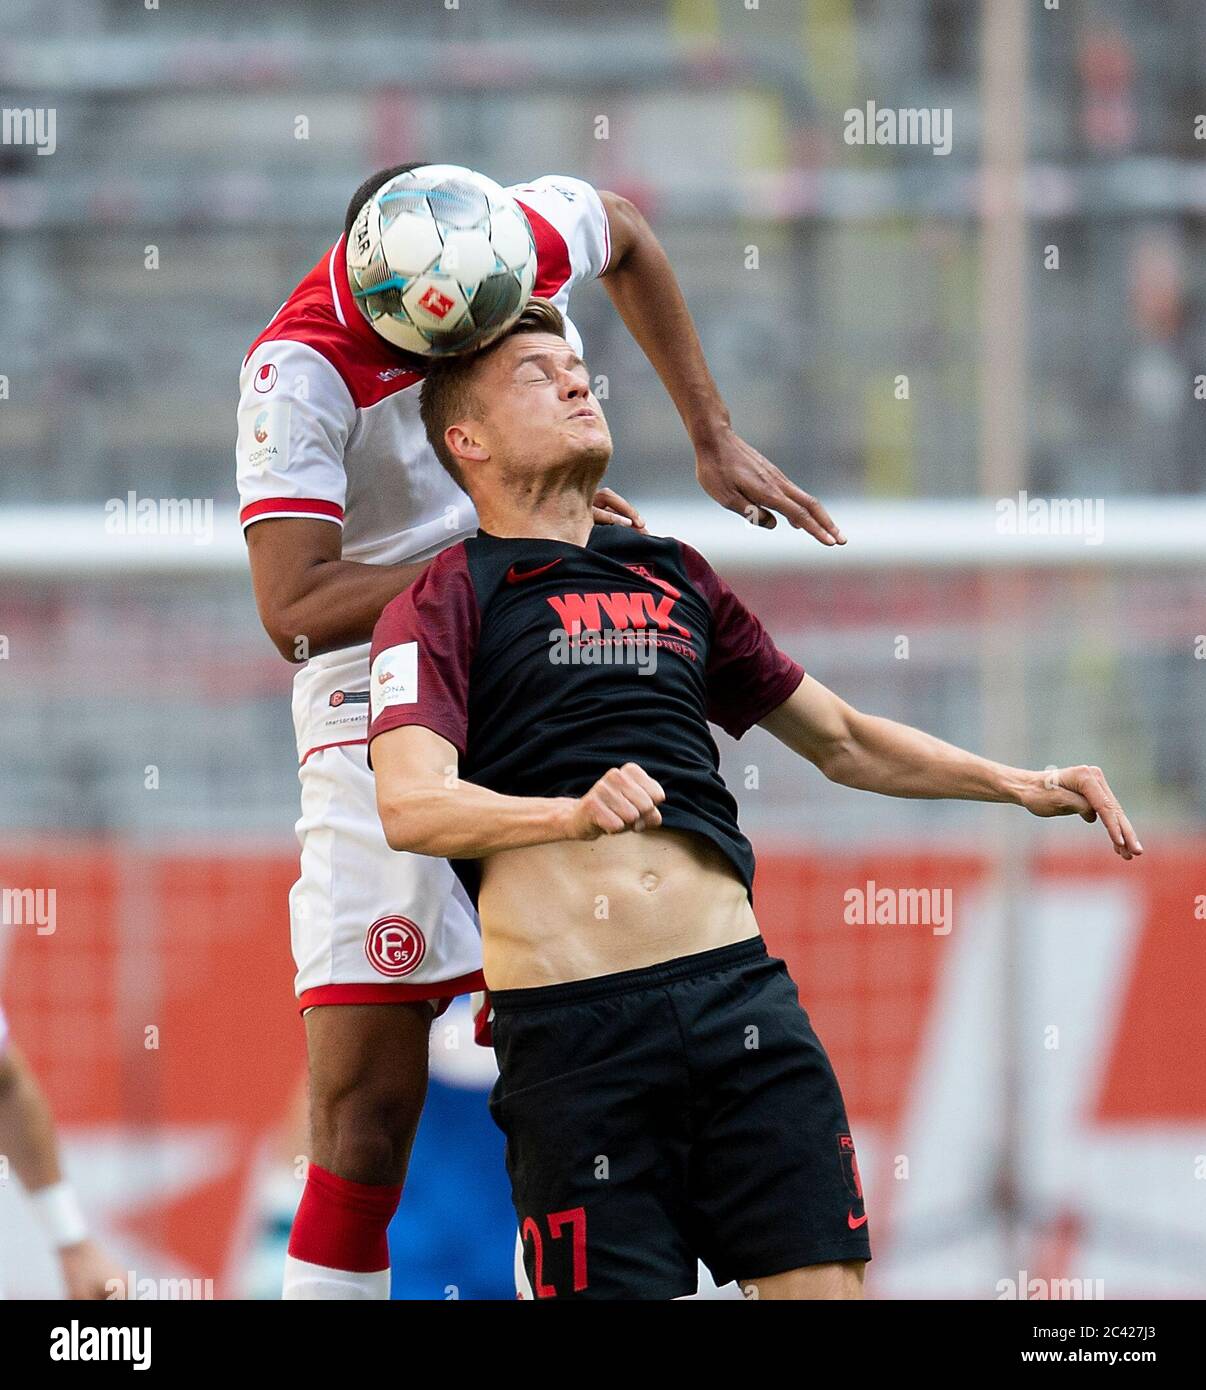 Esprit Arena Duesseldorf Germany 20.6.2020, Football: Bundesliga season 2019/20 matchday 33, Fortuna Duesseldorf (F95, white) vs FC Augsburg (FCA, black) —  Alfred FINNBOGASON  (FCA) beim Kopfball gegen Mathias JOERGENSEN (F95) Due to the Corona pandemic, matches are played in empty stadiums without spectators  credit: AnkeWaelischmiller/Sven Simon/ Pool/via Kolvenbach  # Editorial use only # # DFL regulations prohibit any use of photographs as image sequences and/or quasi-video # # National and international news- agencies out # Stock Photo